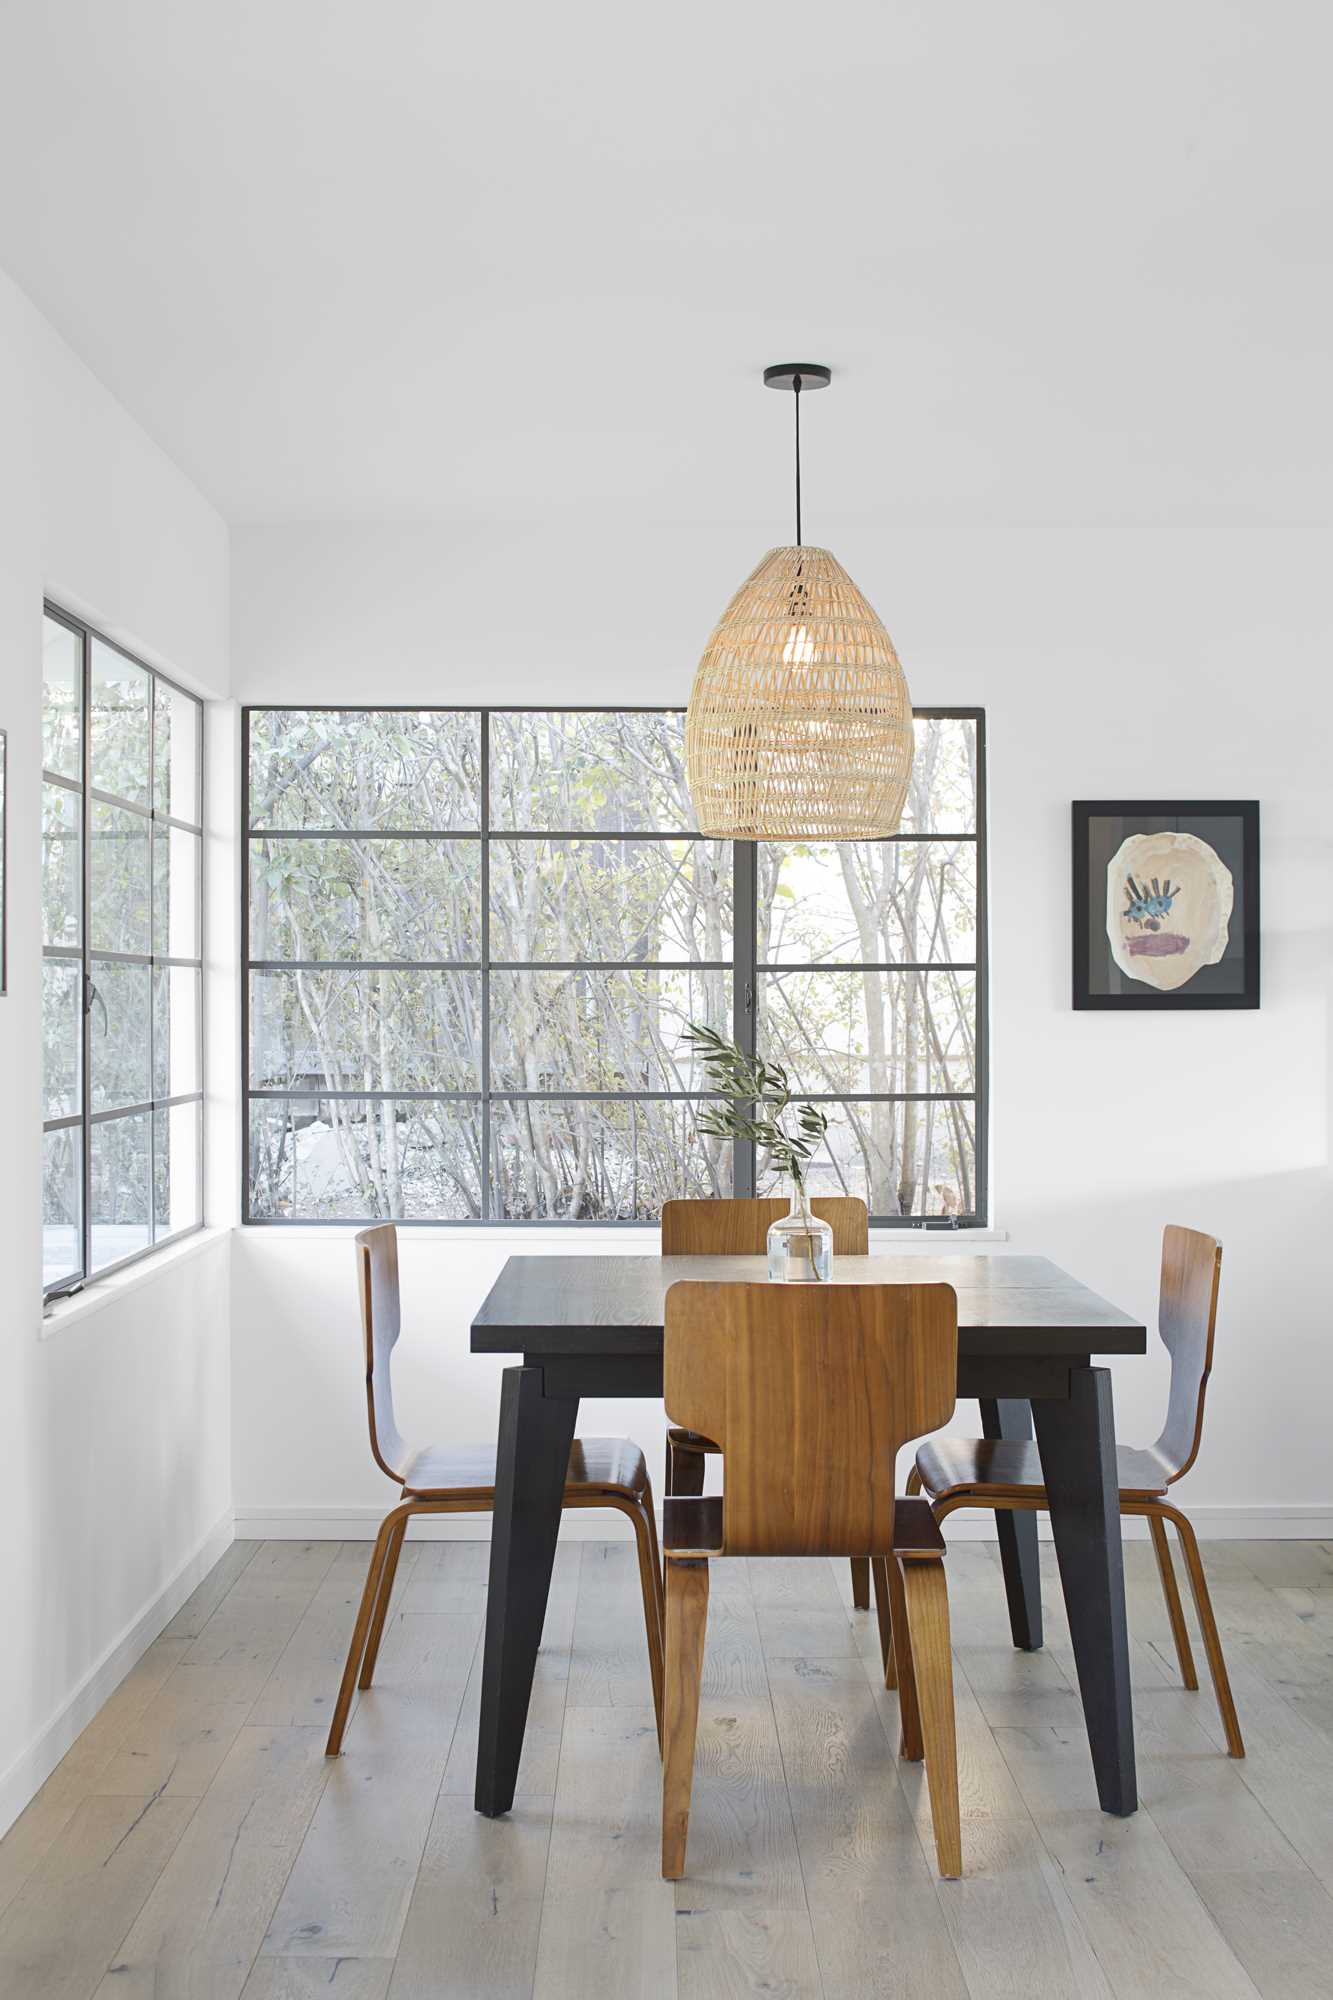 A modern dining room with windows that flood the interior with natural light.